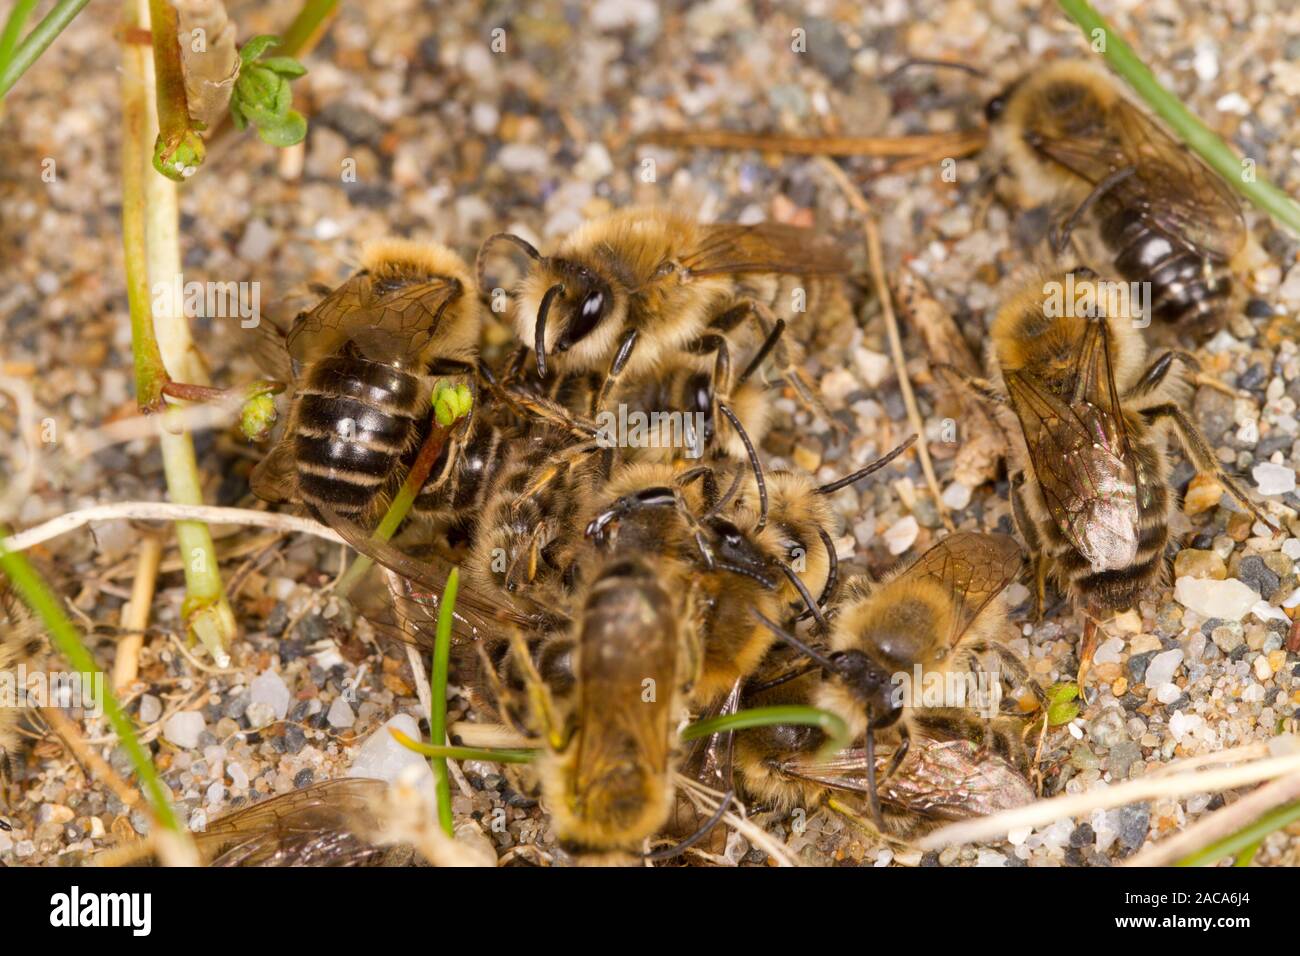 Vernal Colletes (Colletes cunicularis) adult bees mating aggregation on coastal sand in spring. Aber Dysynni, Gwynedd, Wales. March. Stock Photo